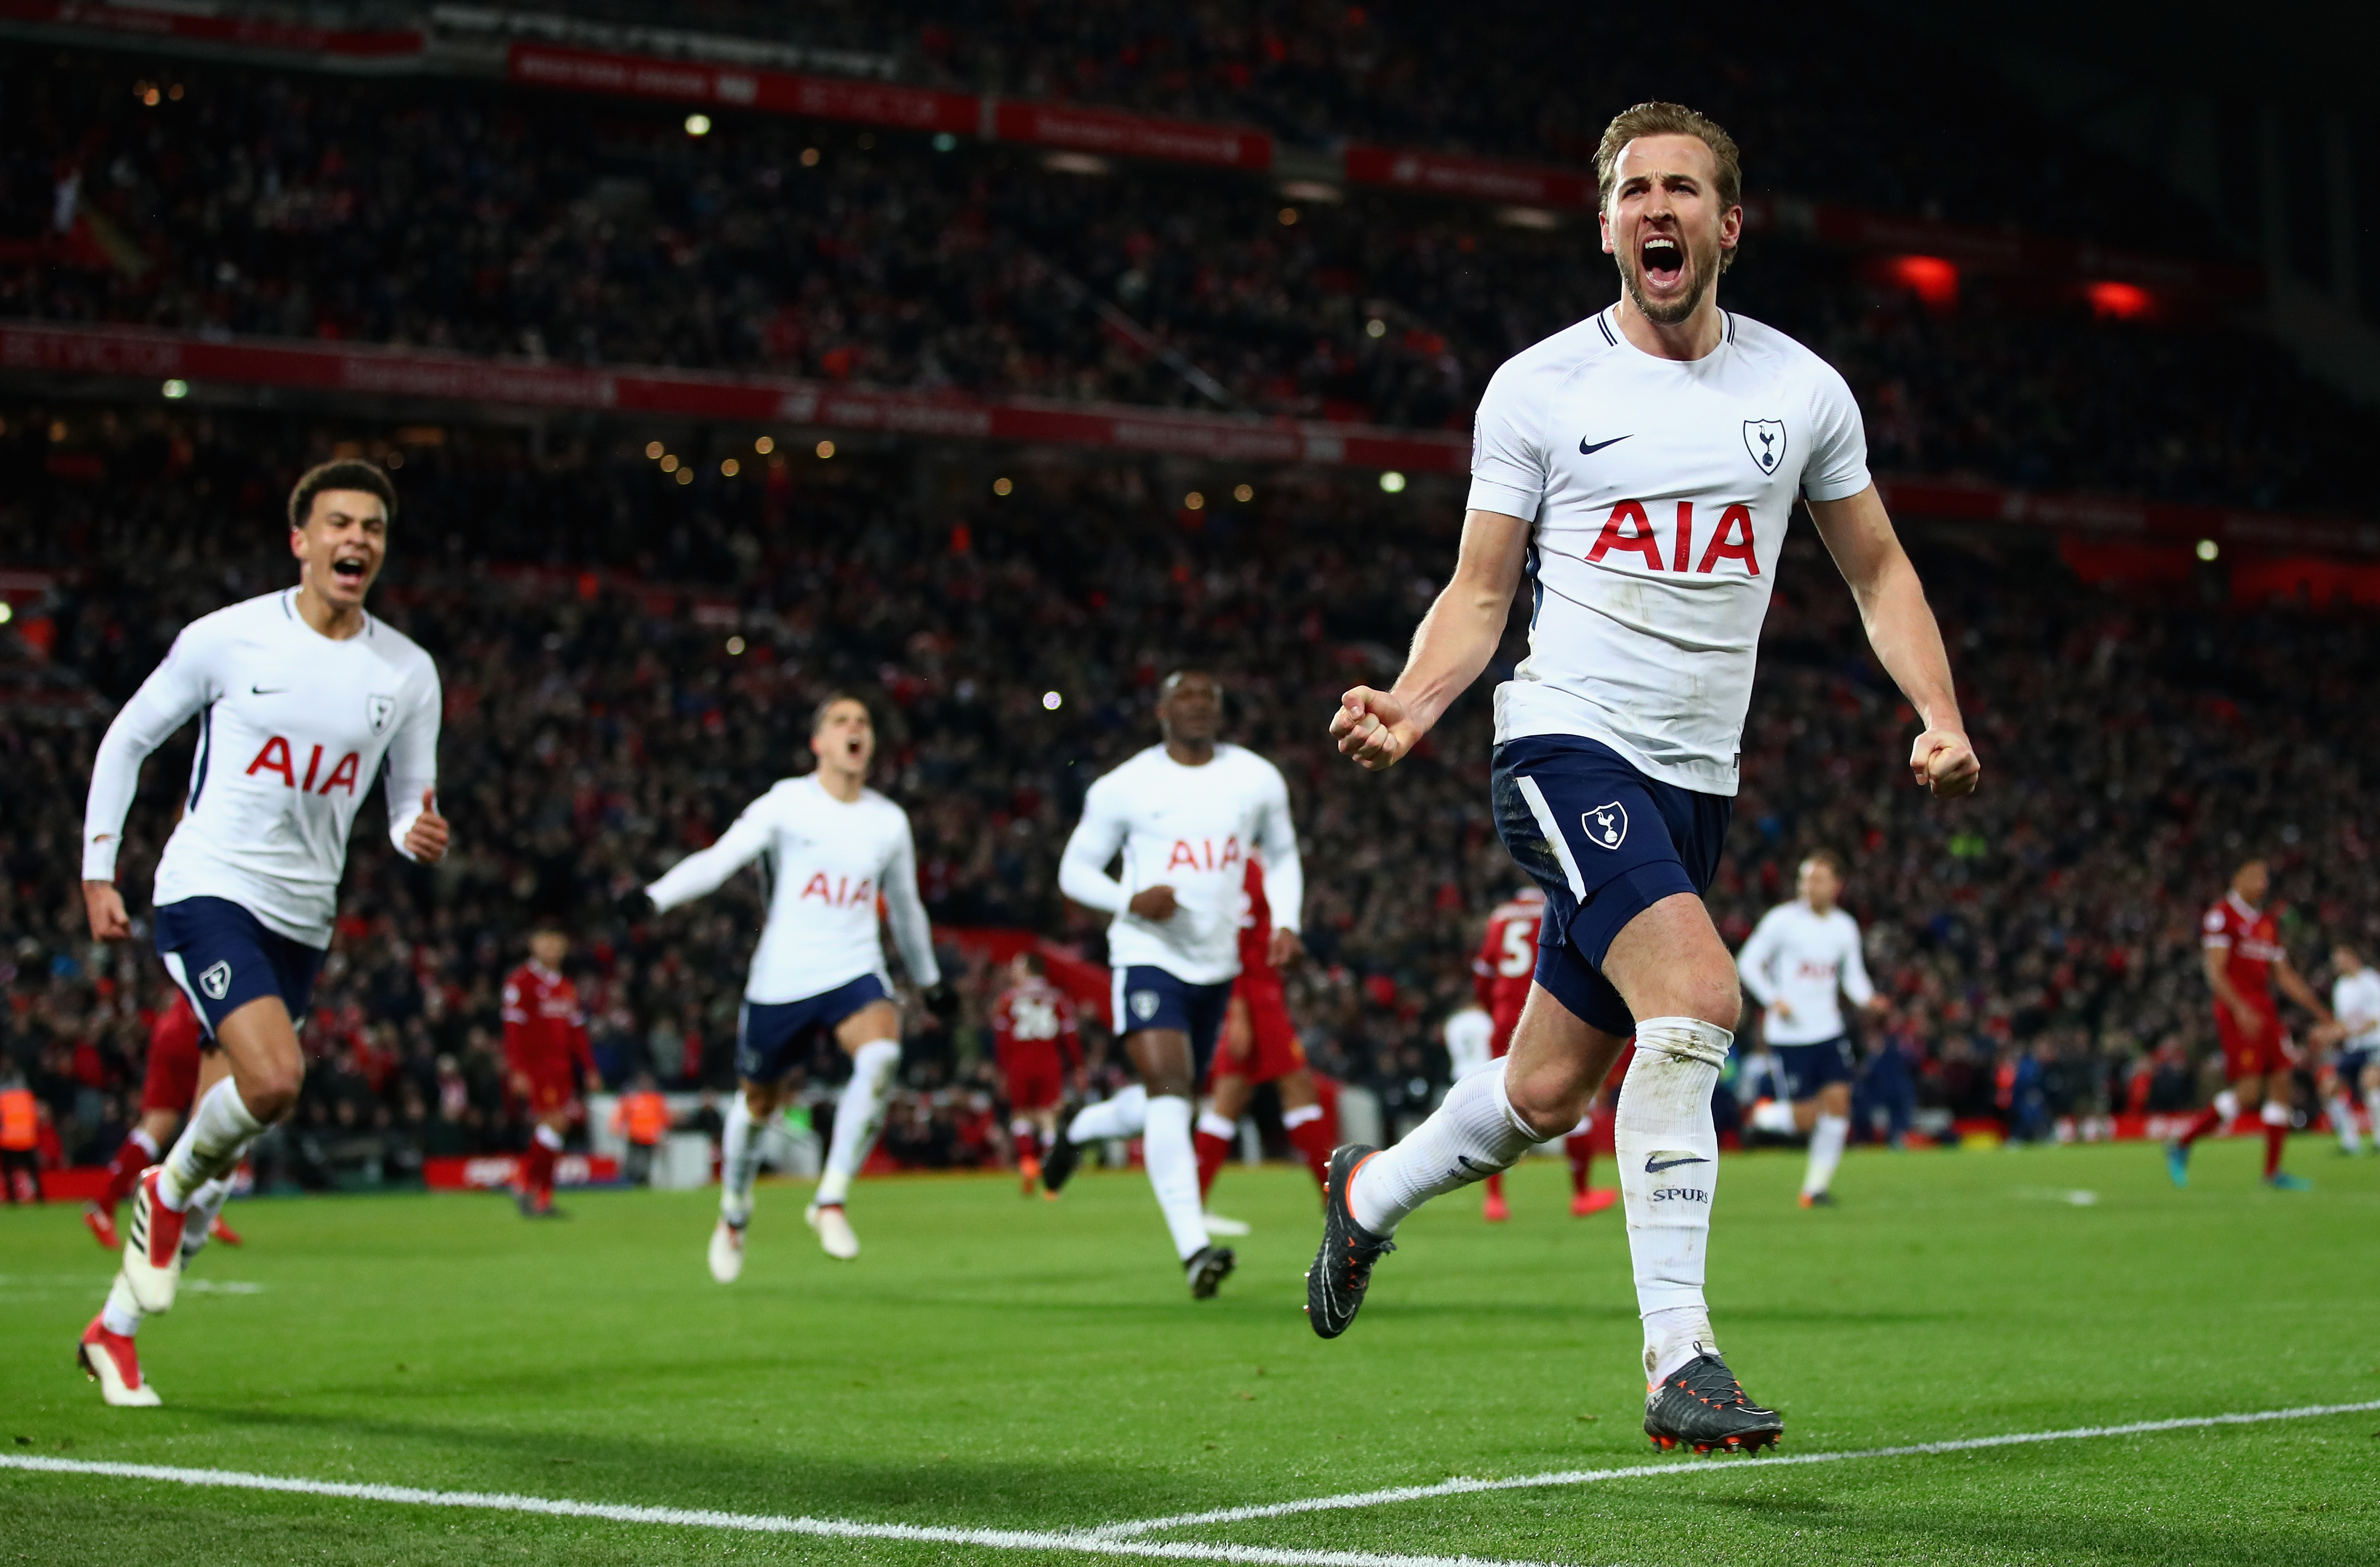 Harry Kane puts rumours to bed as he confirms that he is set to stay at Spurs